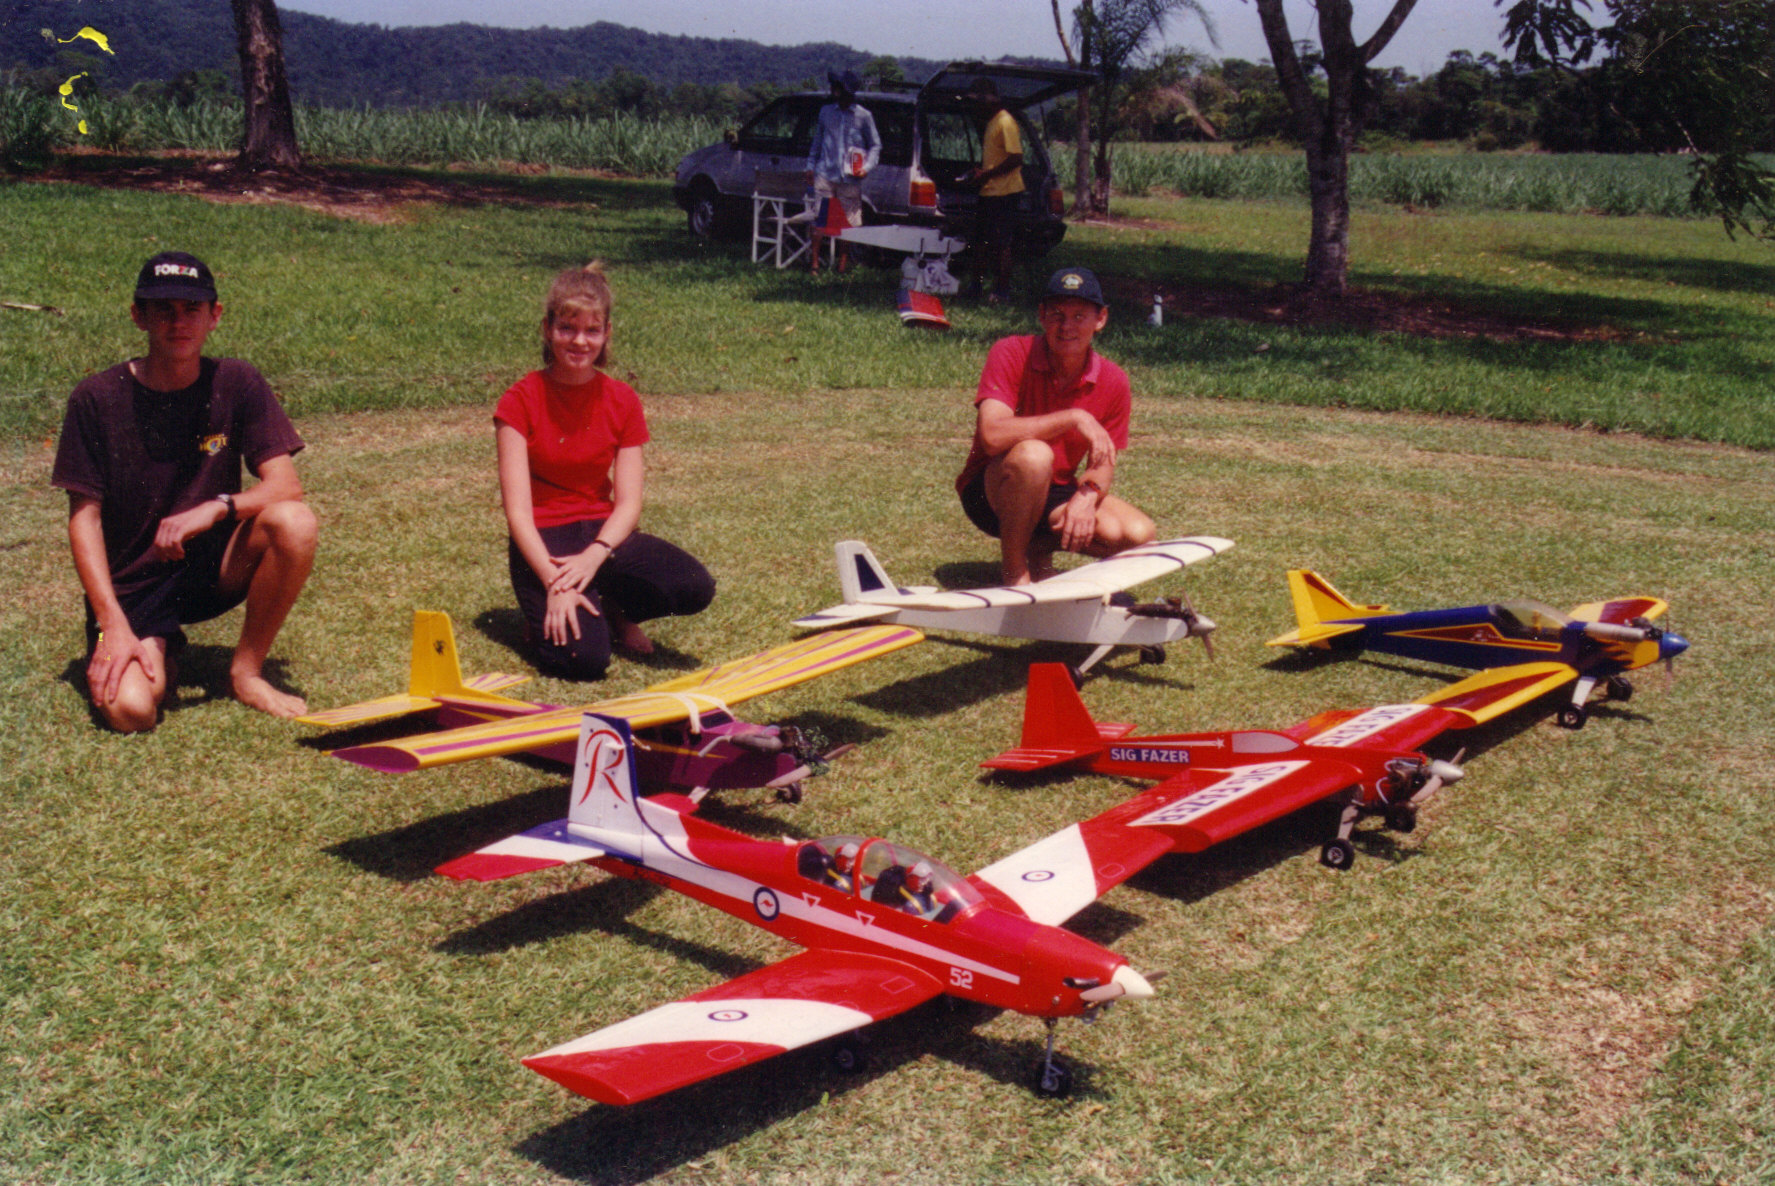 image: Melanie Olsen (middle) with her self-built remote-control plane (purple and yellow 40-60). Far North Queensland, 1997